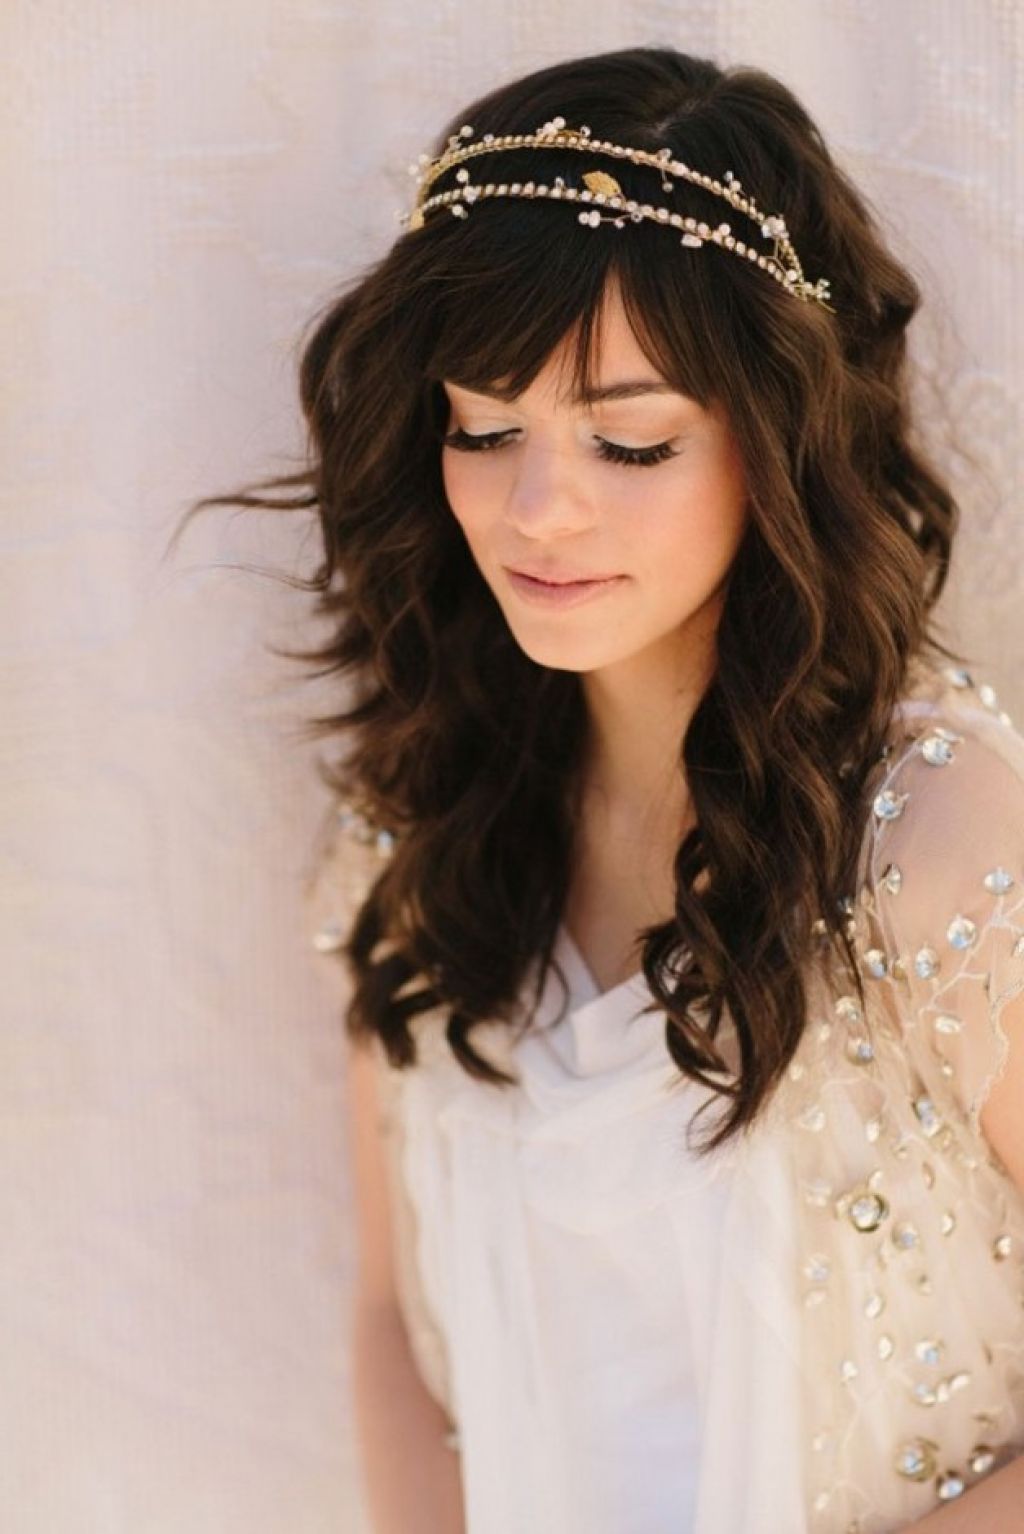 60+ Wedding & Bridal Hairstyle Ideas, Trends & Inspiration - The Xerxes